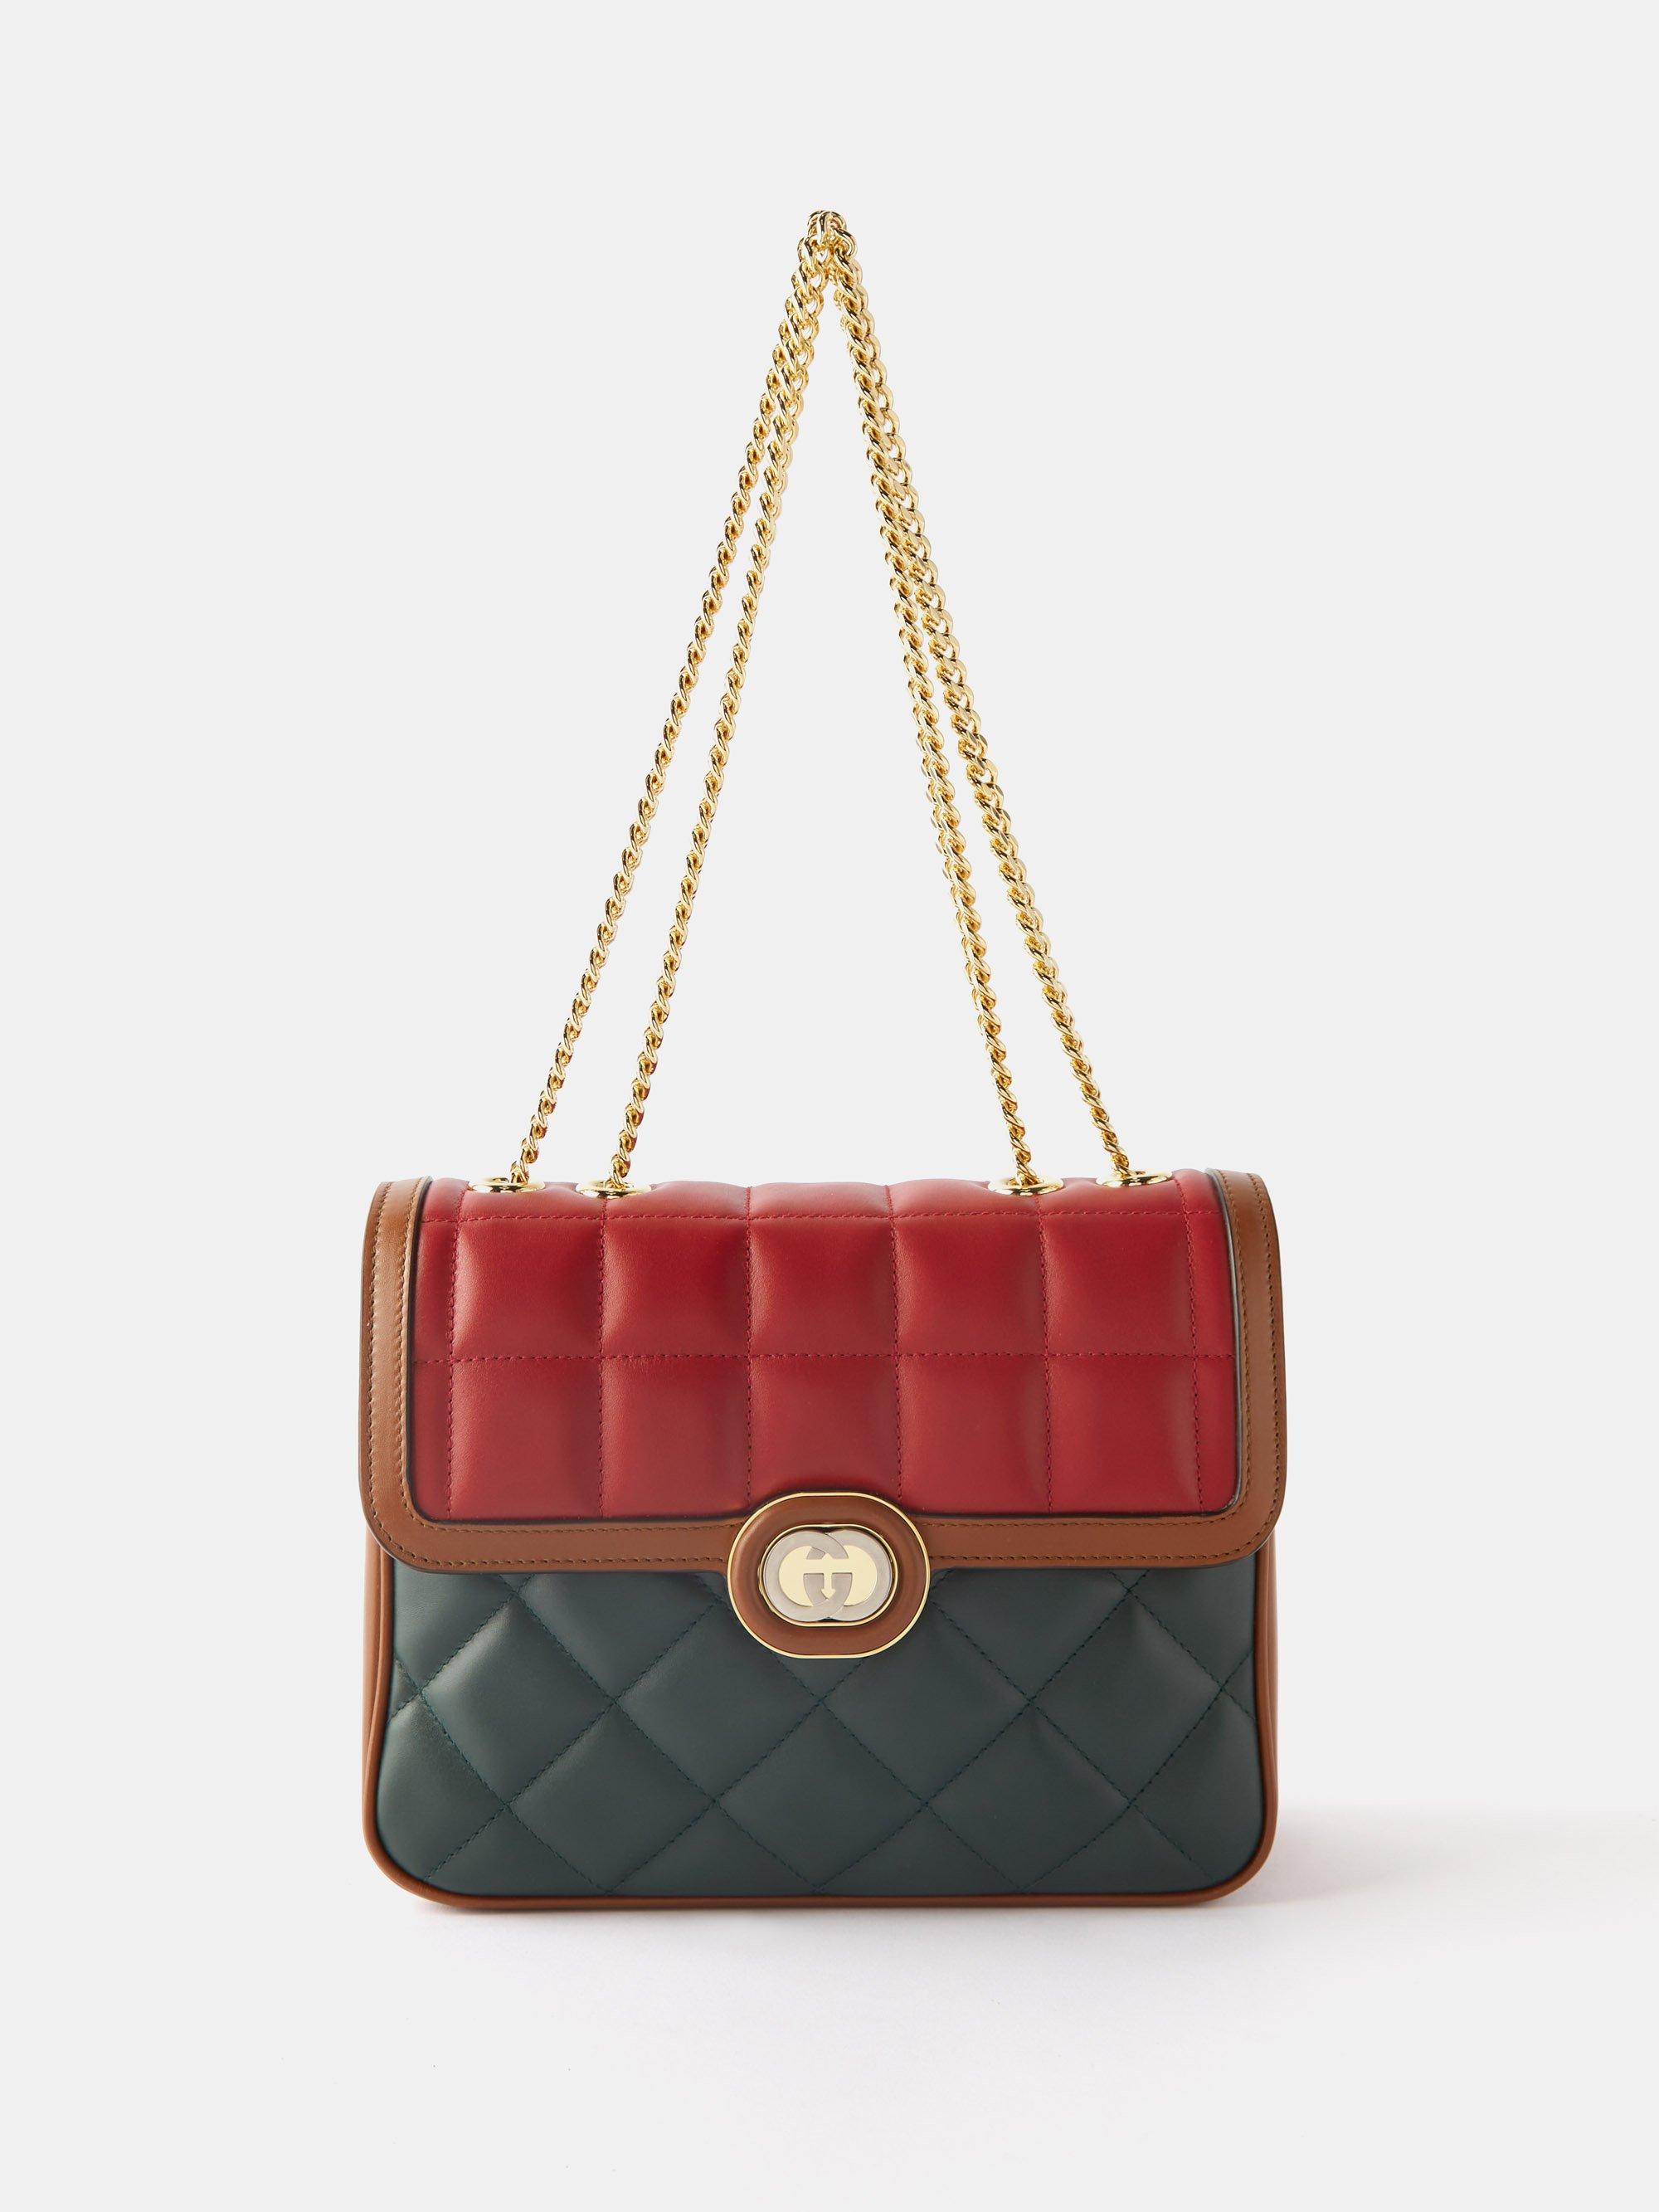 Gucci Deco Quilted Leather Cross-body Bag in Red | Lyst